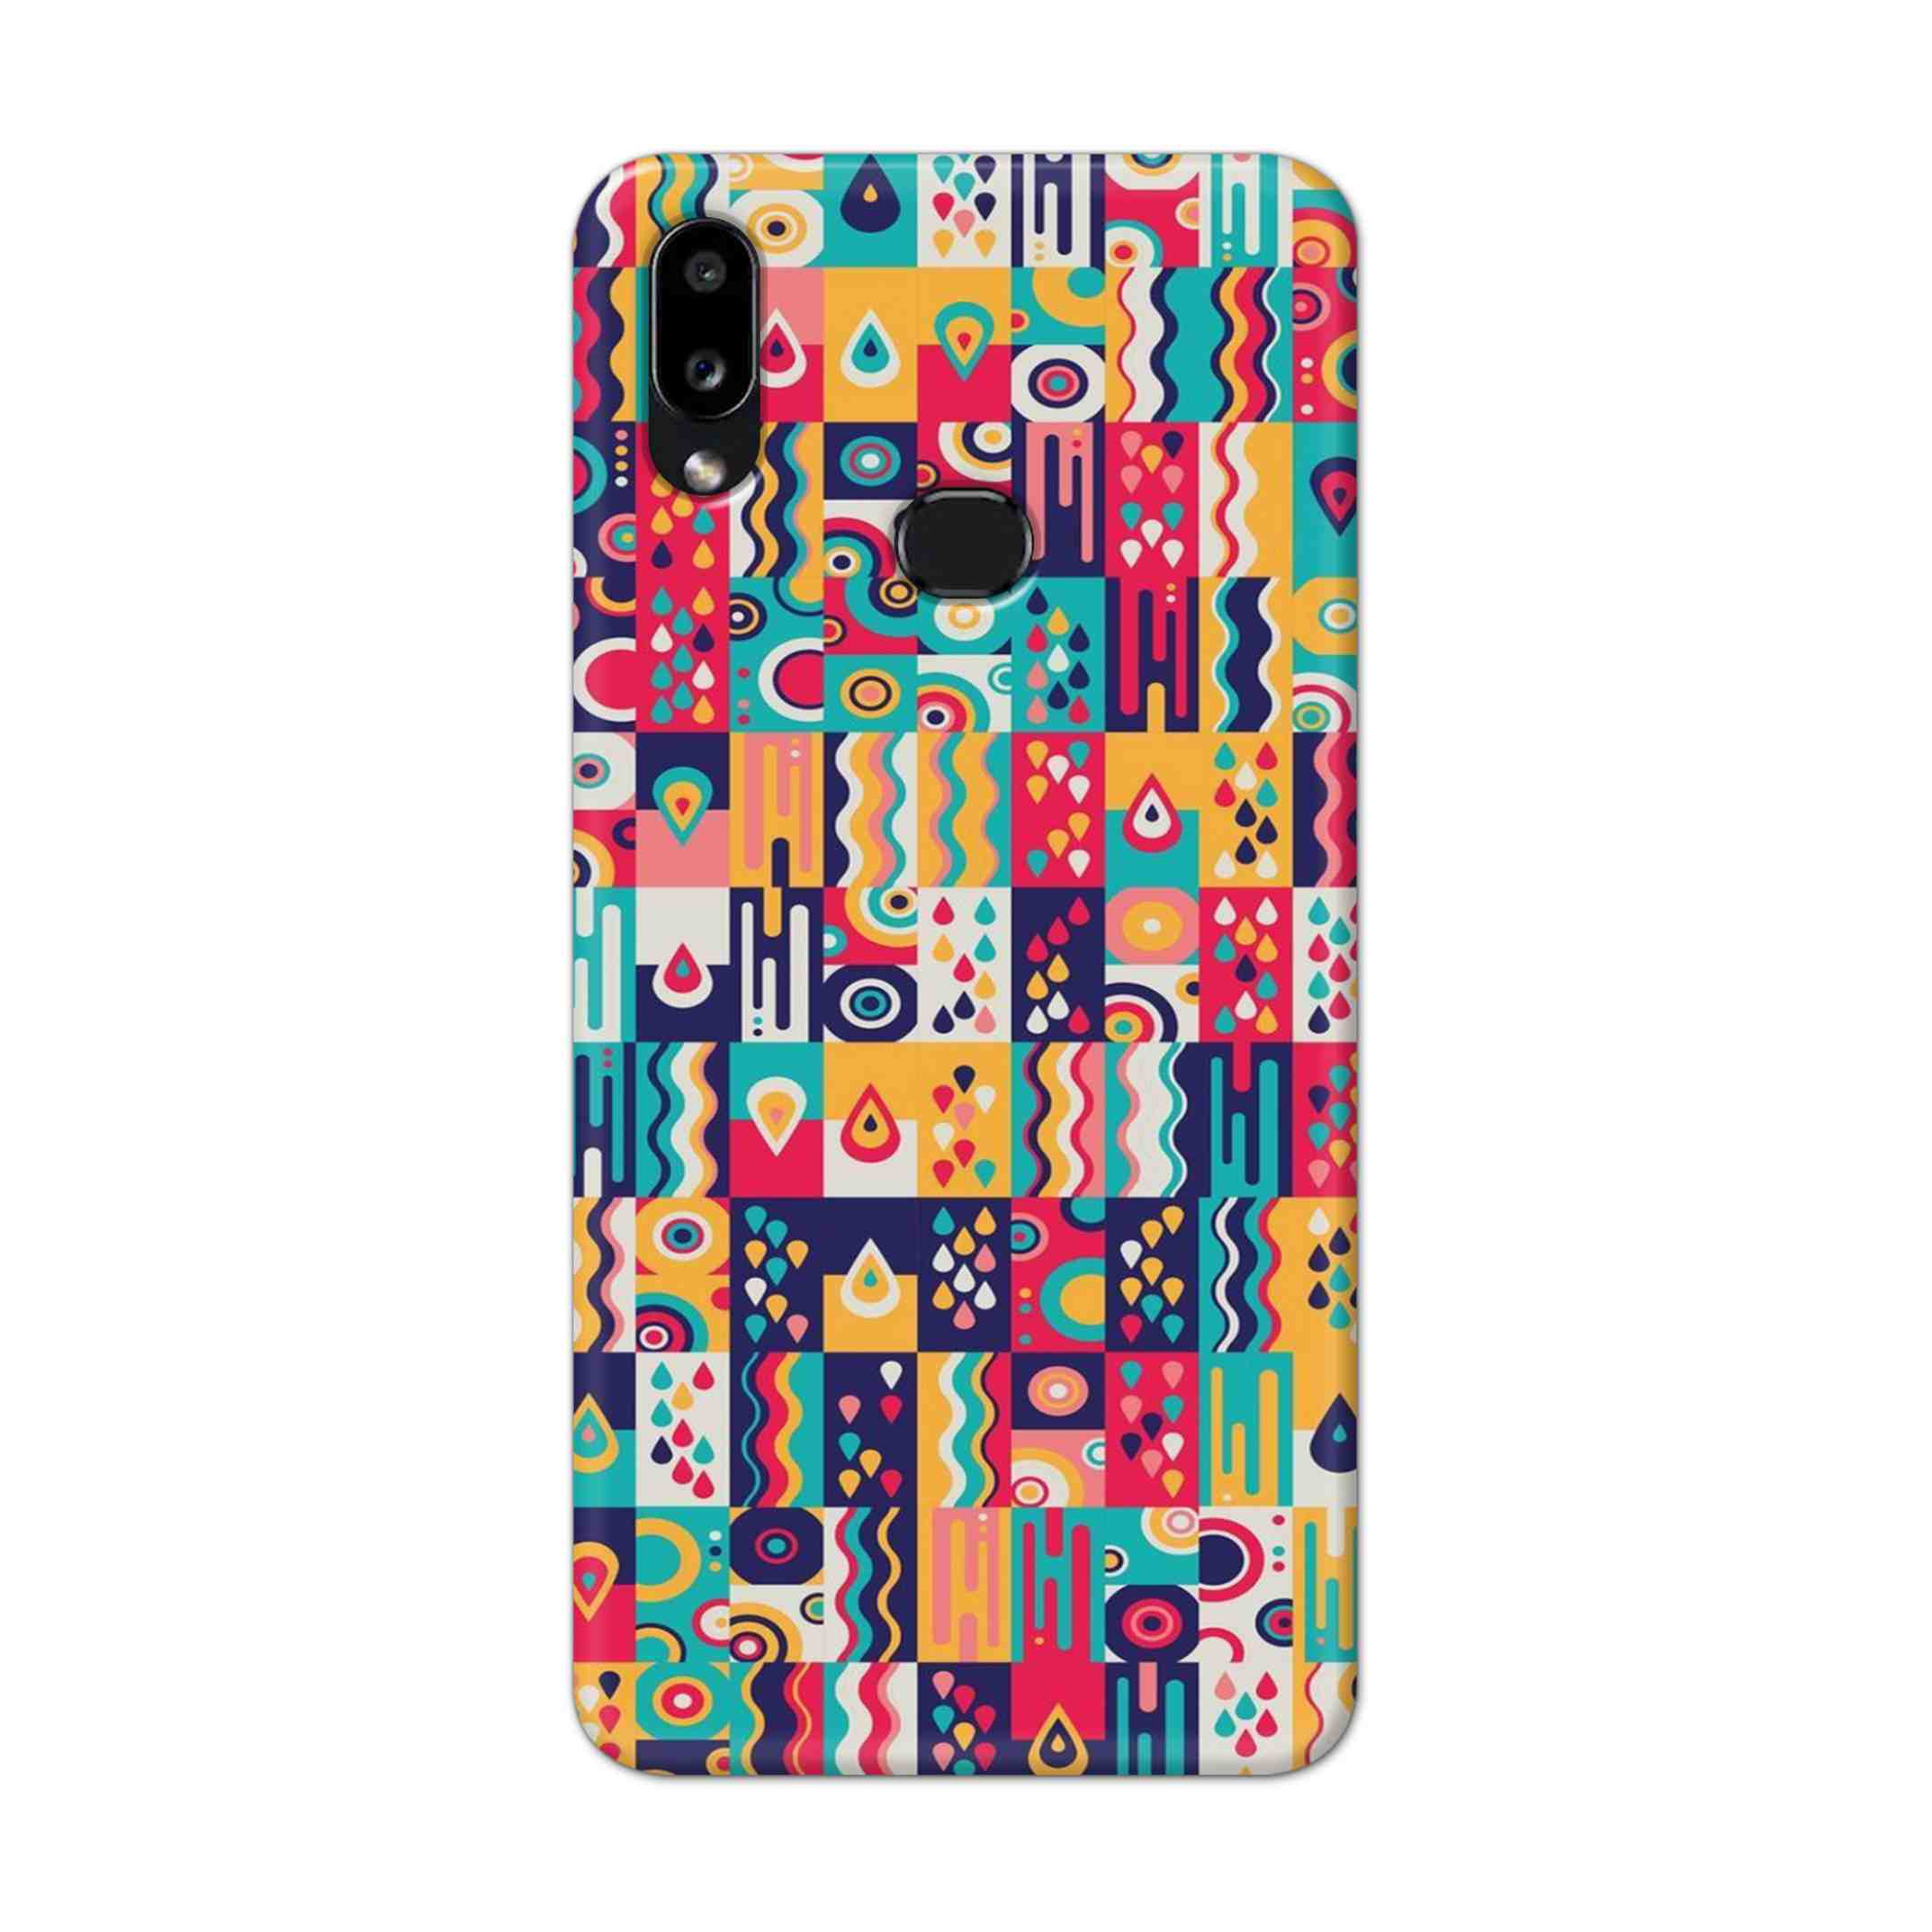 Buy Art Hard Back Mobile Phone Case Cover For Samsung Galaxy M01s Online